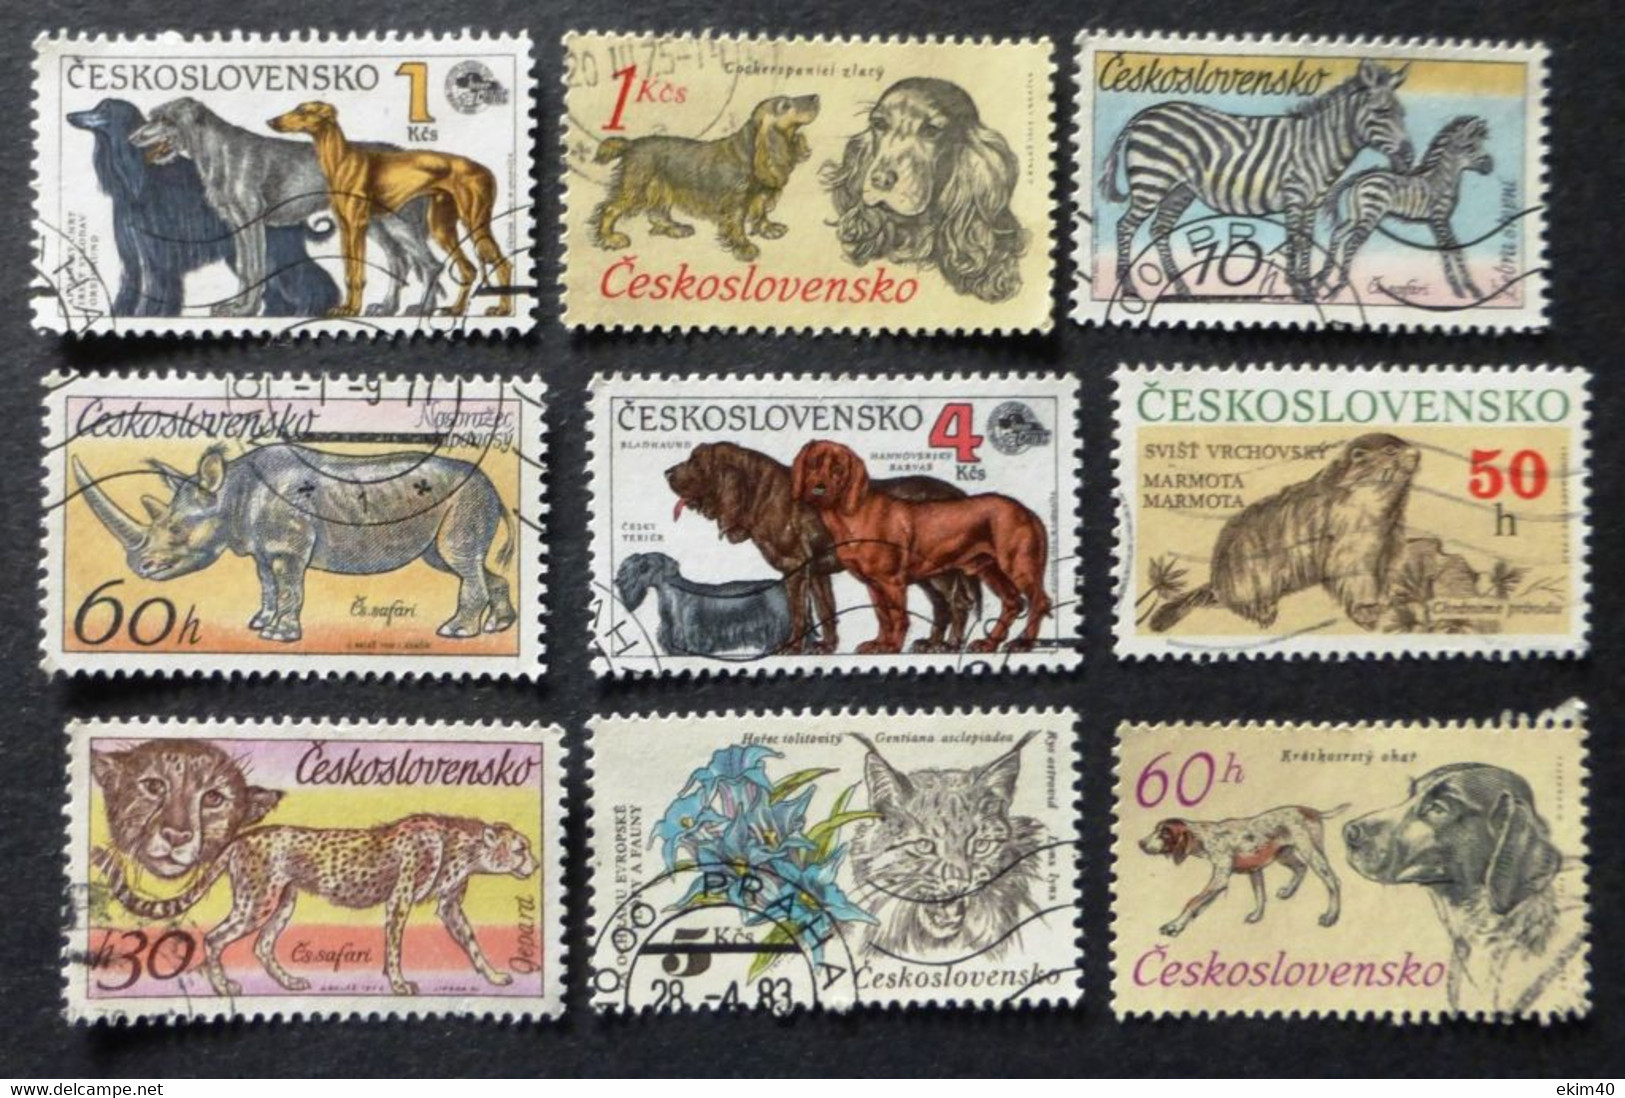 Selection Of Used/Cancelled Stamps From Czechoslovakia Wild & Domestic Animals. No DC-320 - Usati